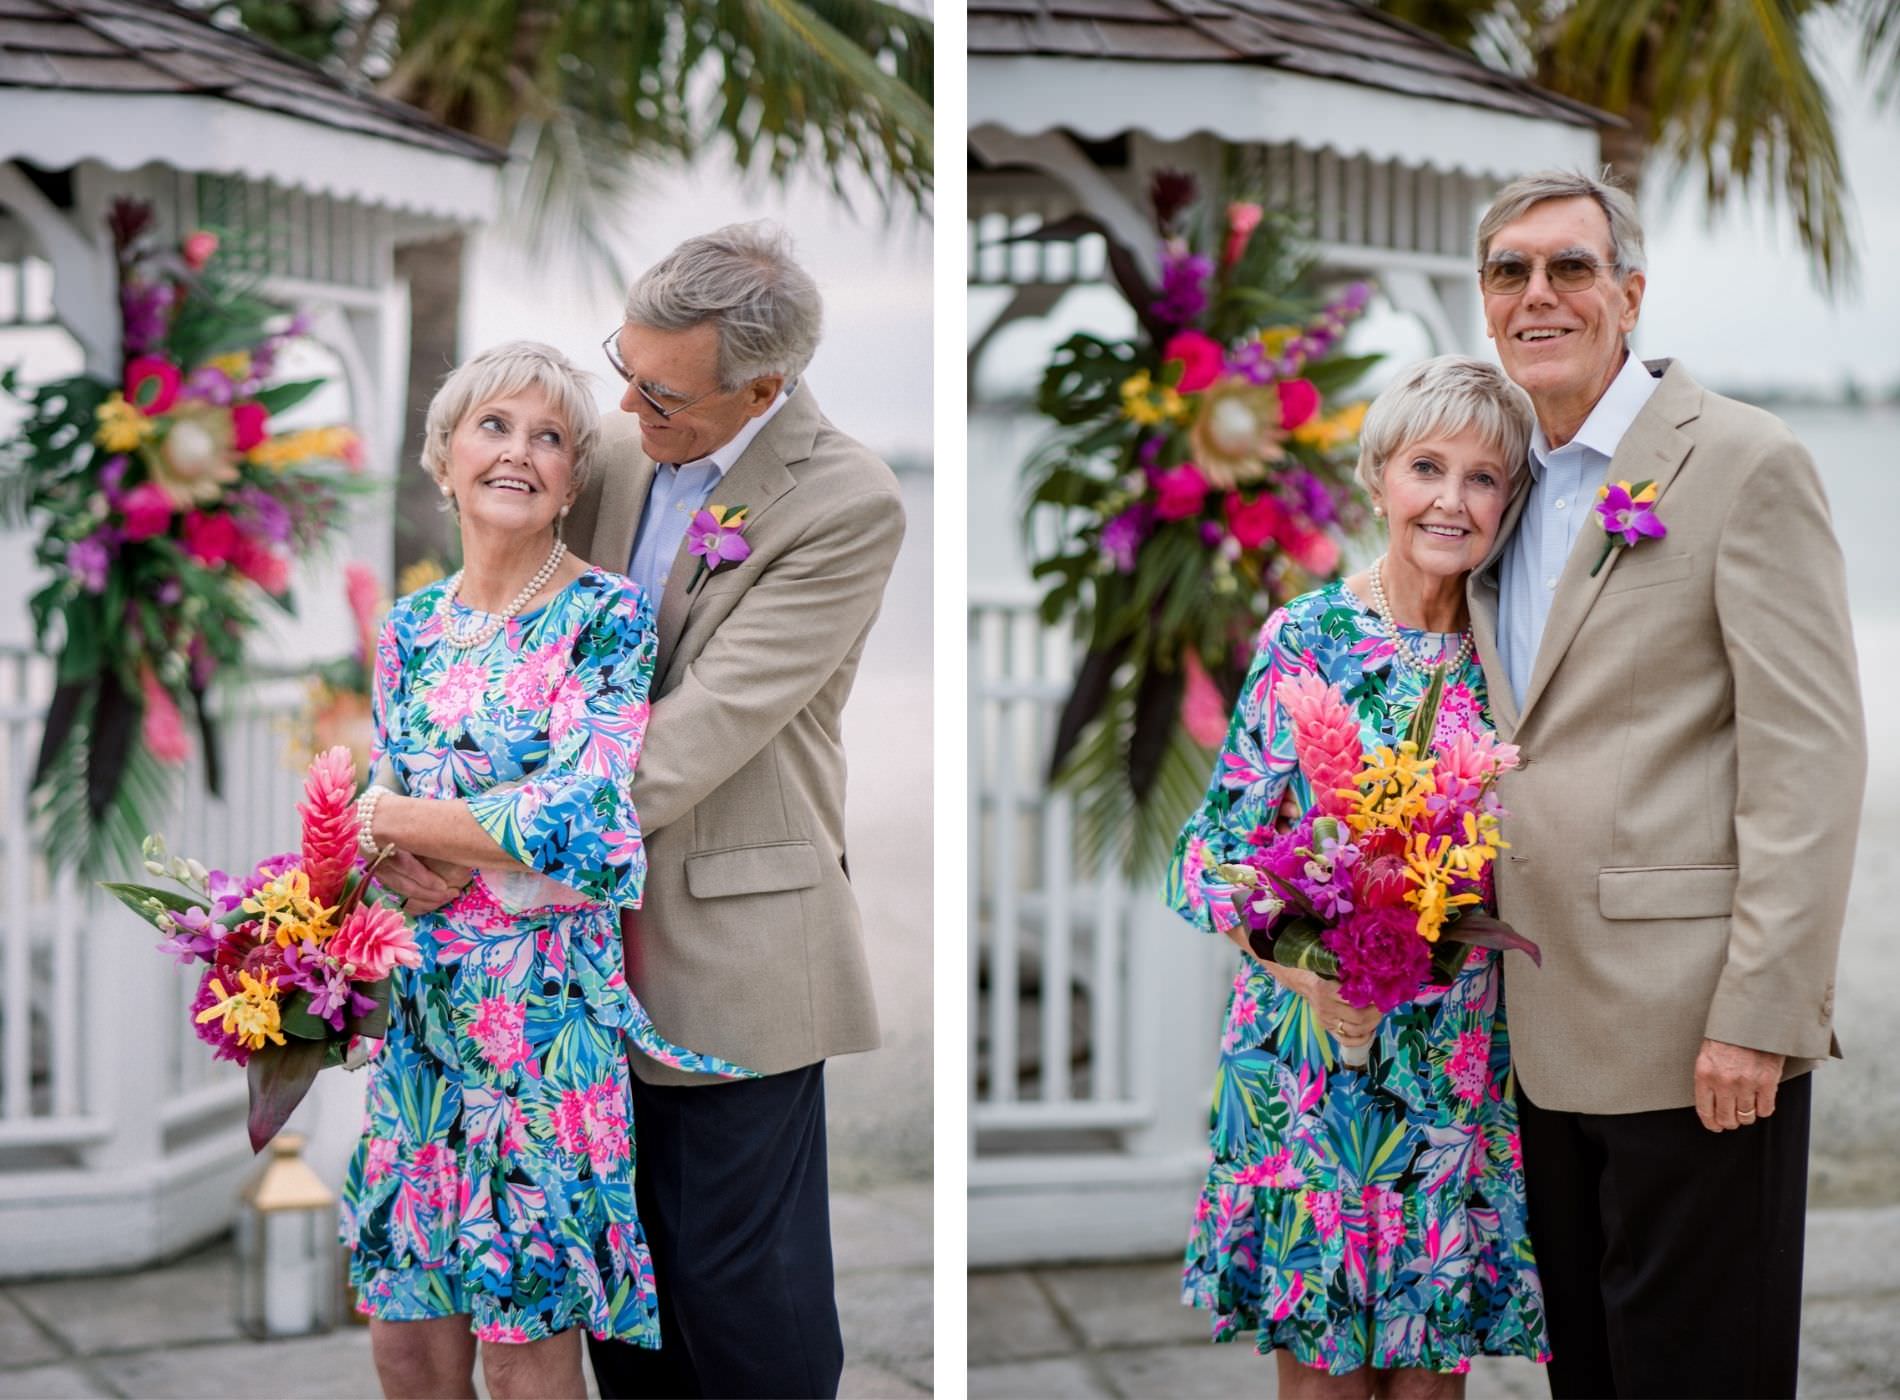 Florida Husband and Wife at Tropical Wedding Vow Renewal Ceremony with Decor, Lilly Pulitzer Themed Attire, and Floral Arrangements, Gazebo Alter with Bright Pink Exotic Flowers, Purple Stems, Blush King Proteas, with Green Palms and Monstera Leafs | Tampa Bay Vow Renewal and Micro wedding Planner Perfecting The Plan | St. Petersburg Private Beachfront Venue Isla Del Sol